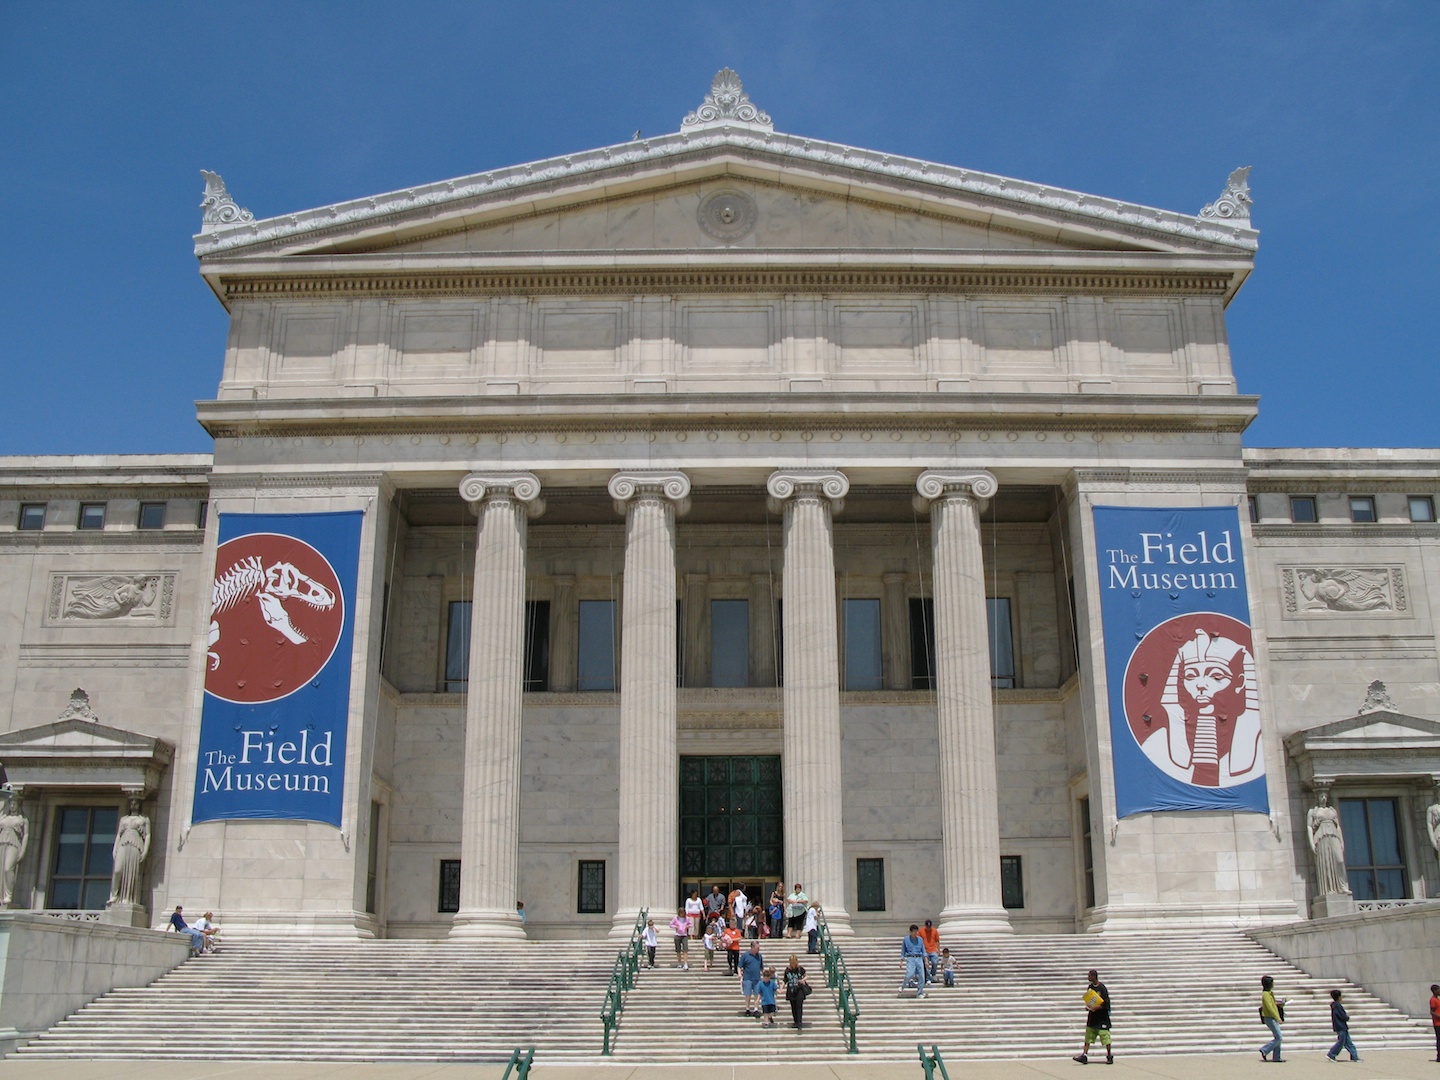 The Field Museum, Chicago, IL